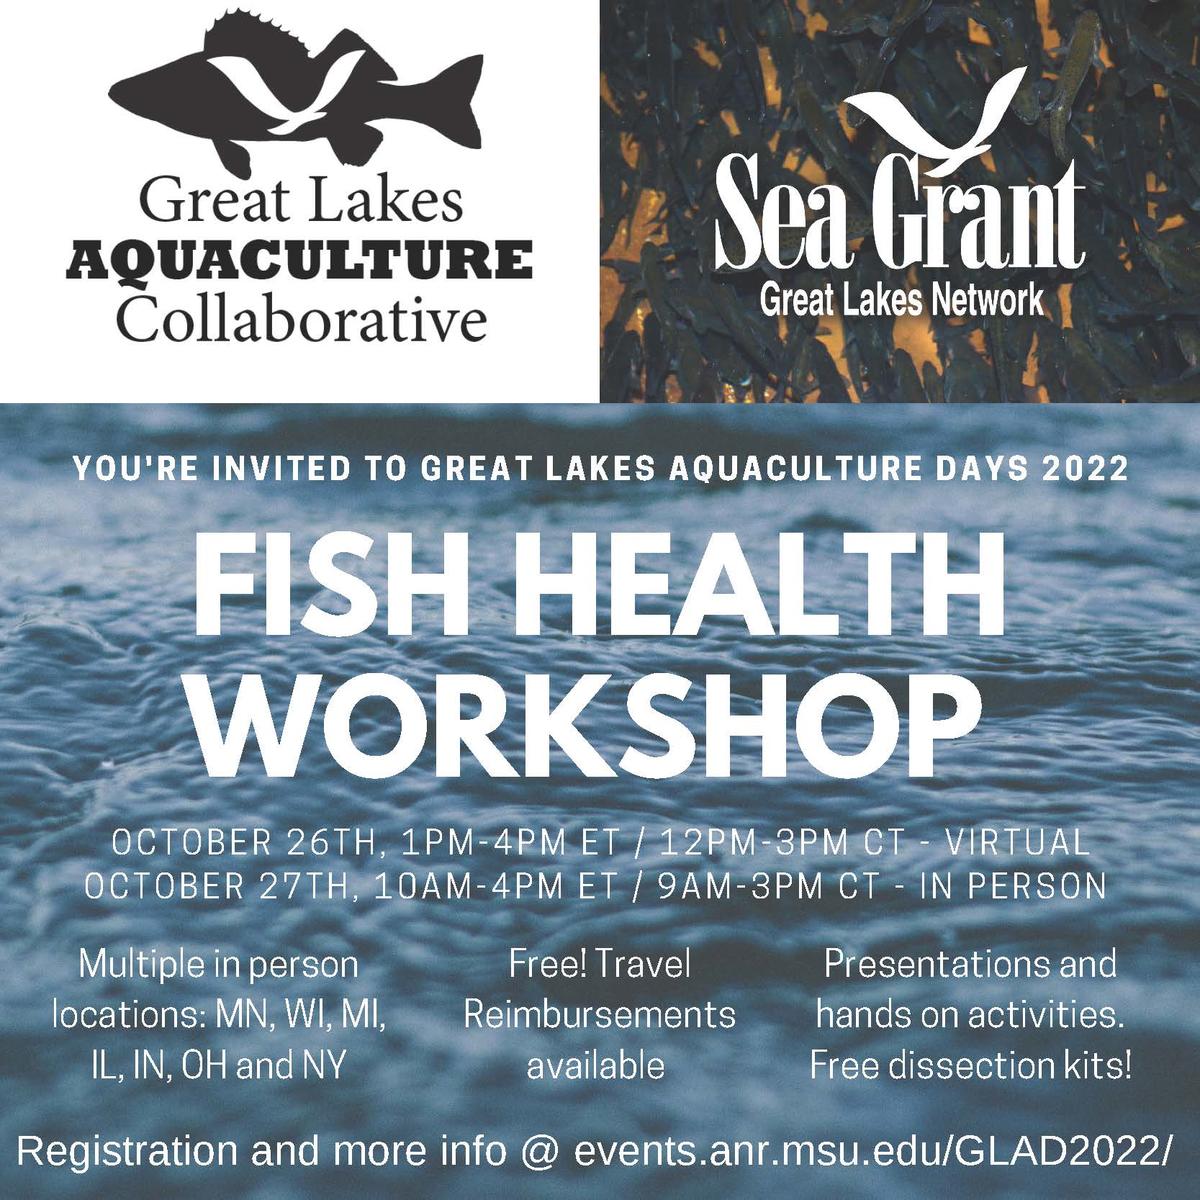 Great Lakes Aquaculture Days 2022 flyer.